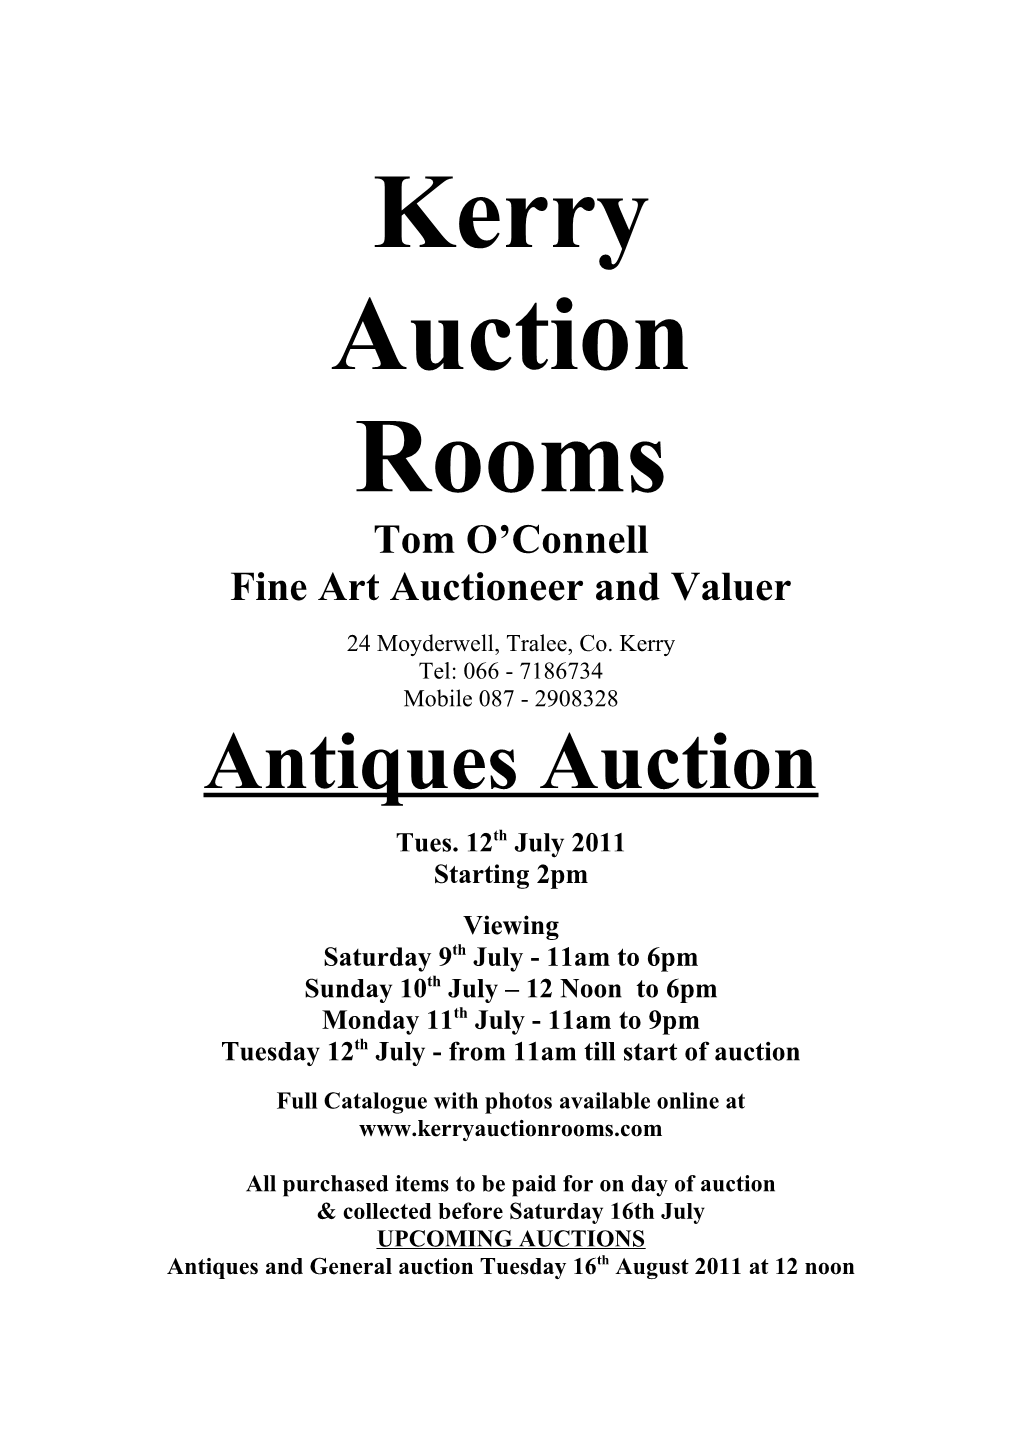 Fine Art Auctioneer and Valuer